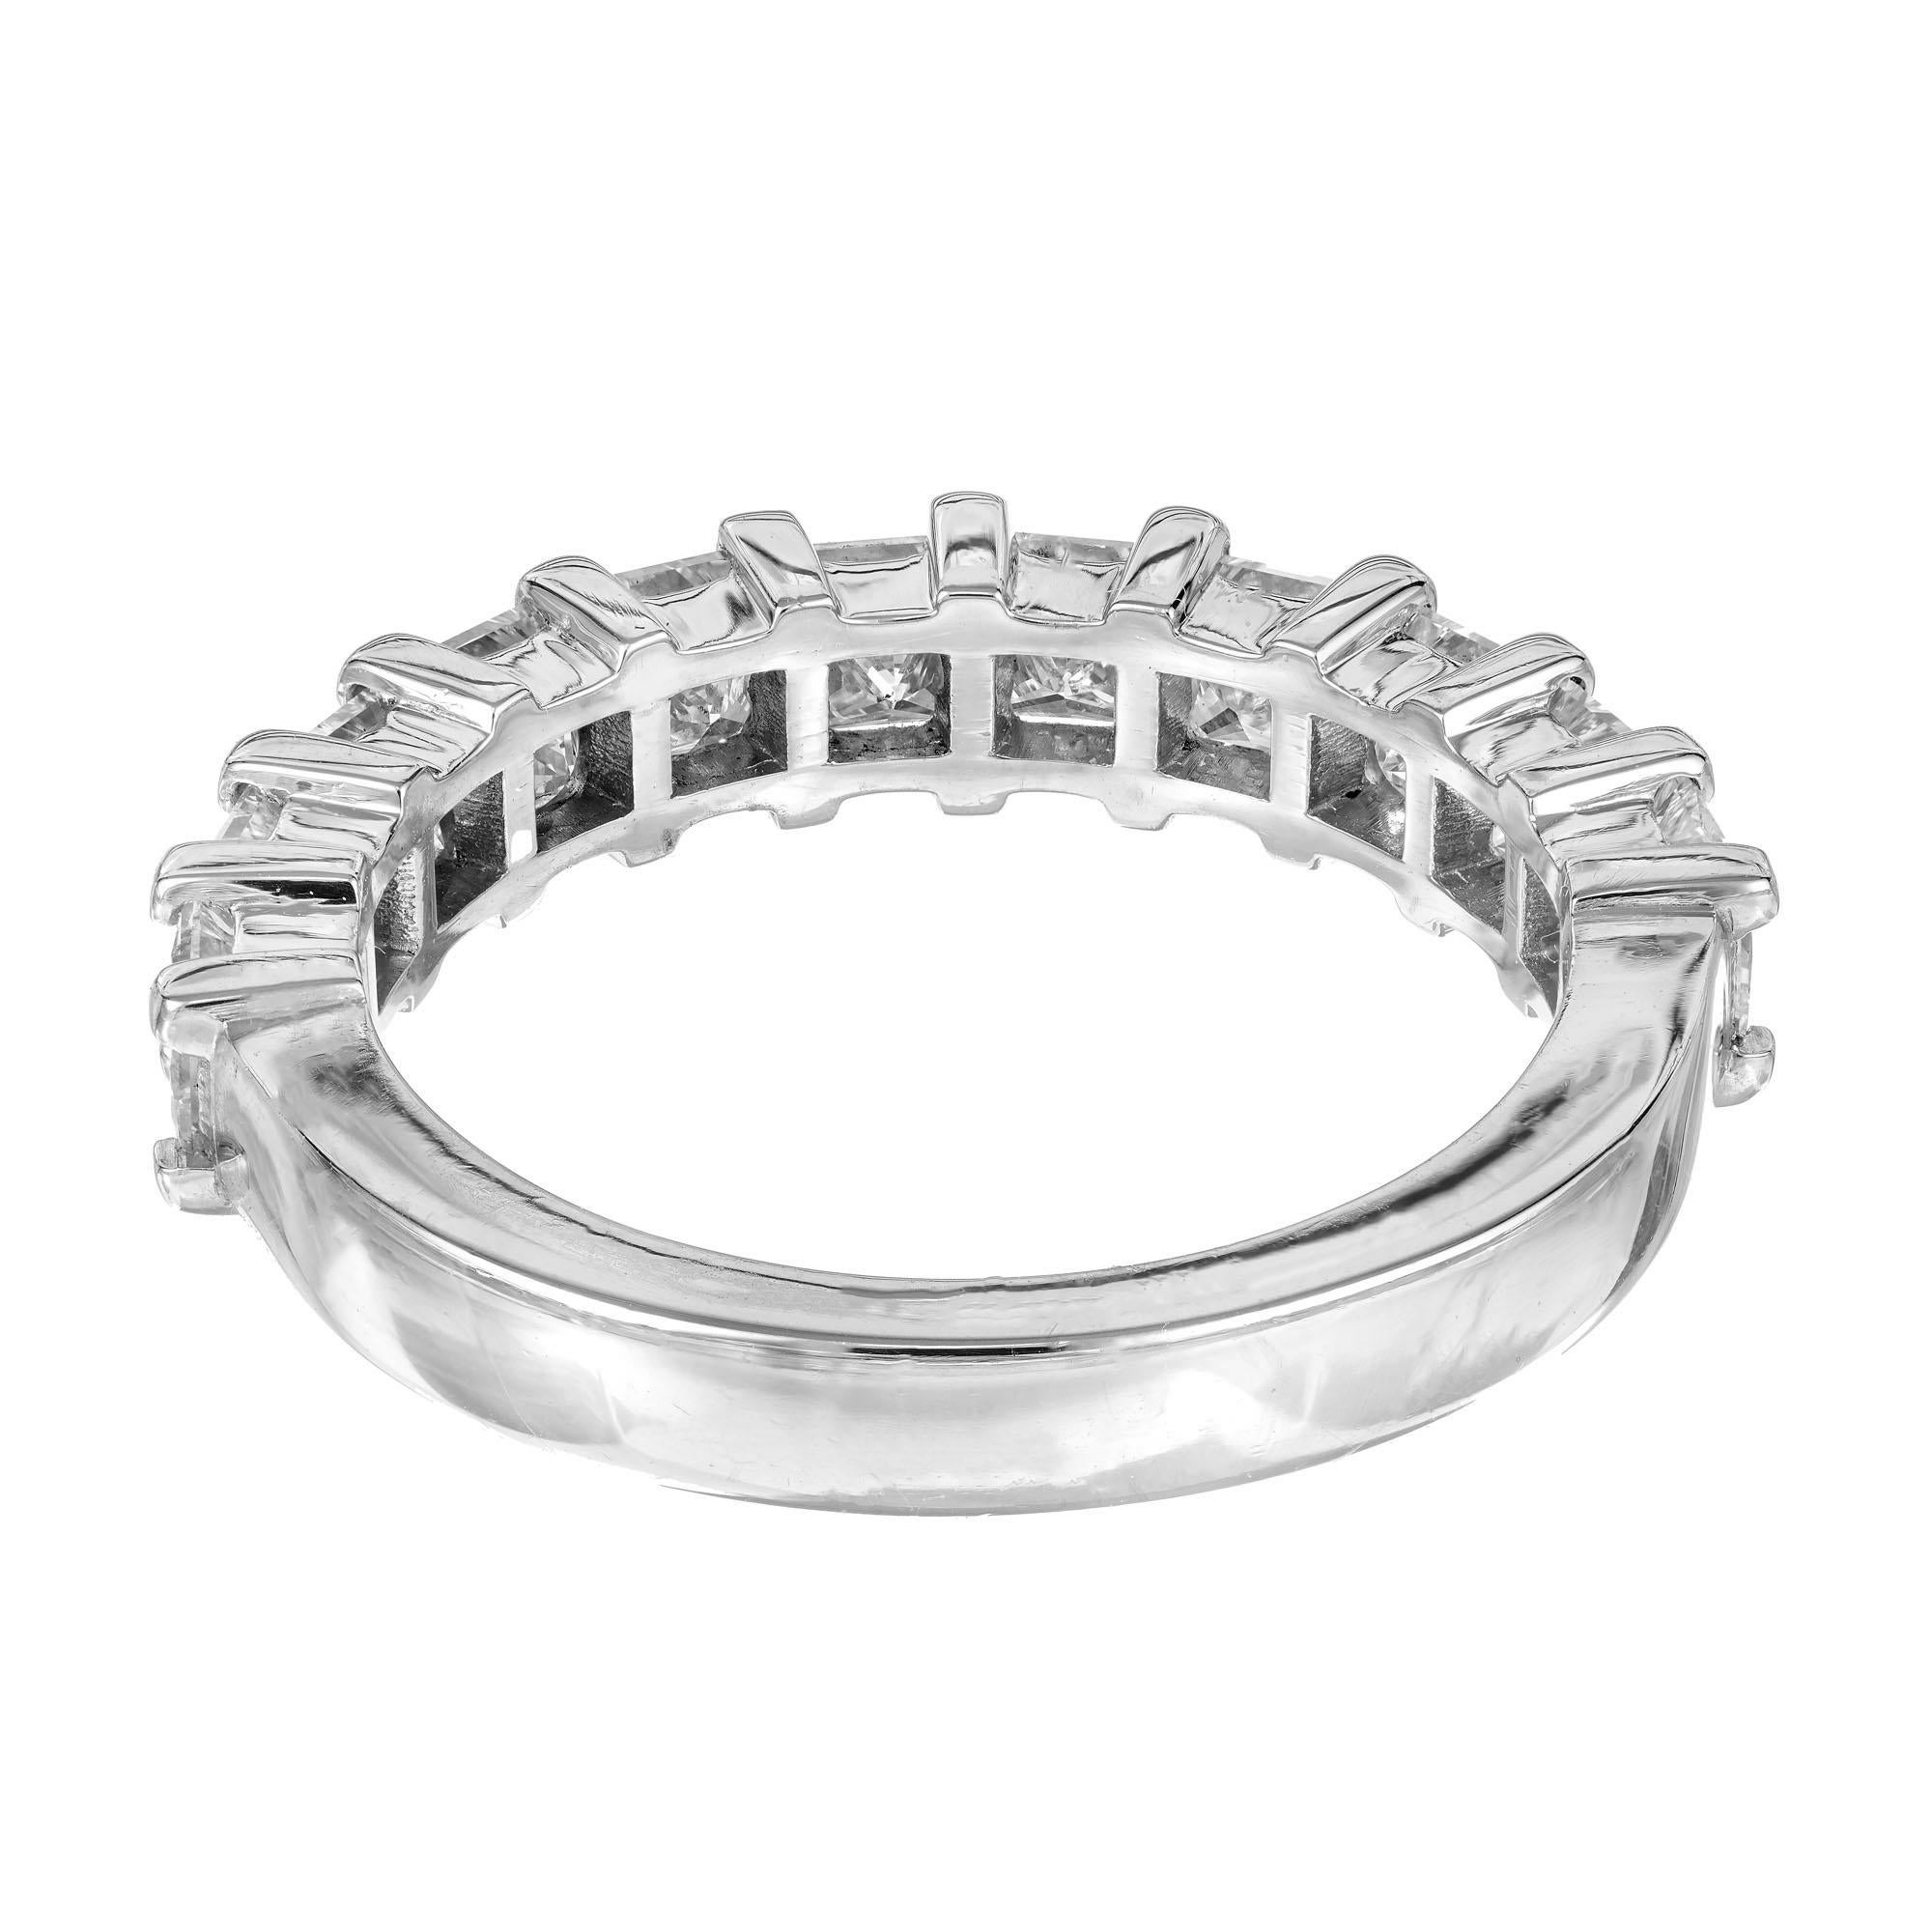 Peter Suchy 1.75 Carat Princess Cut Diamond Platinum Wedding Band Ring In Excellent Condition For Sale In Stamford, CT